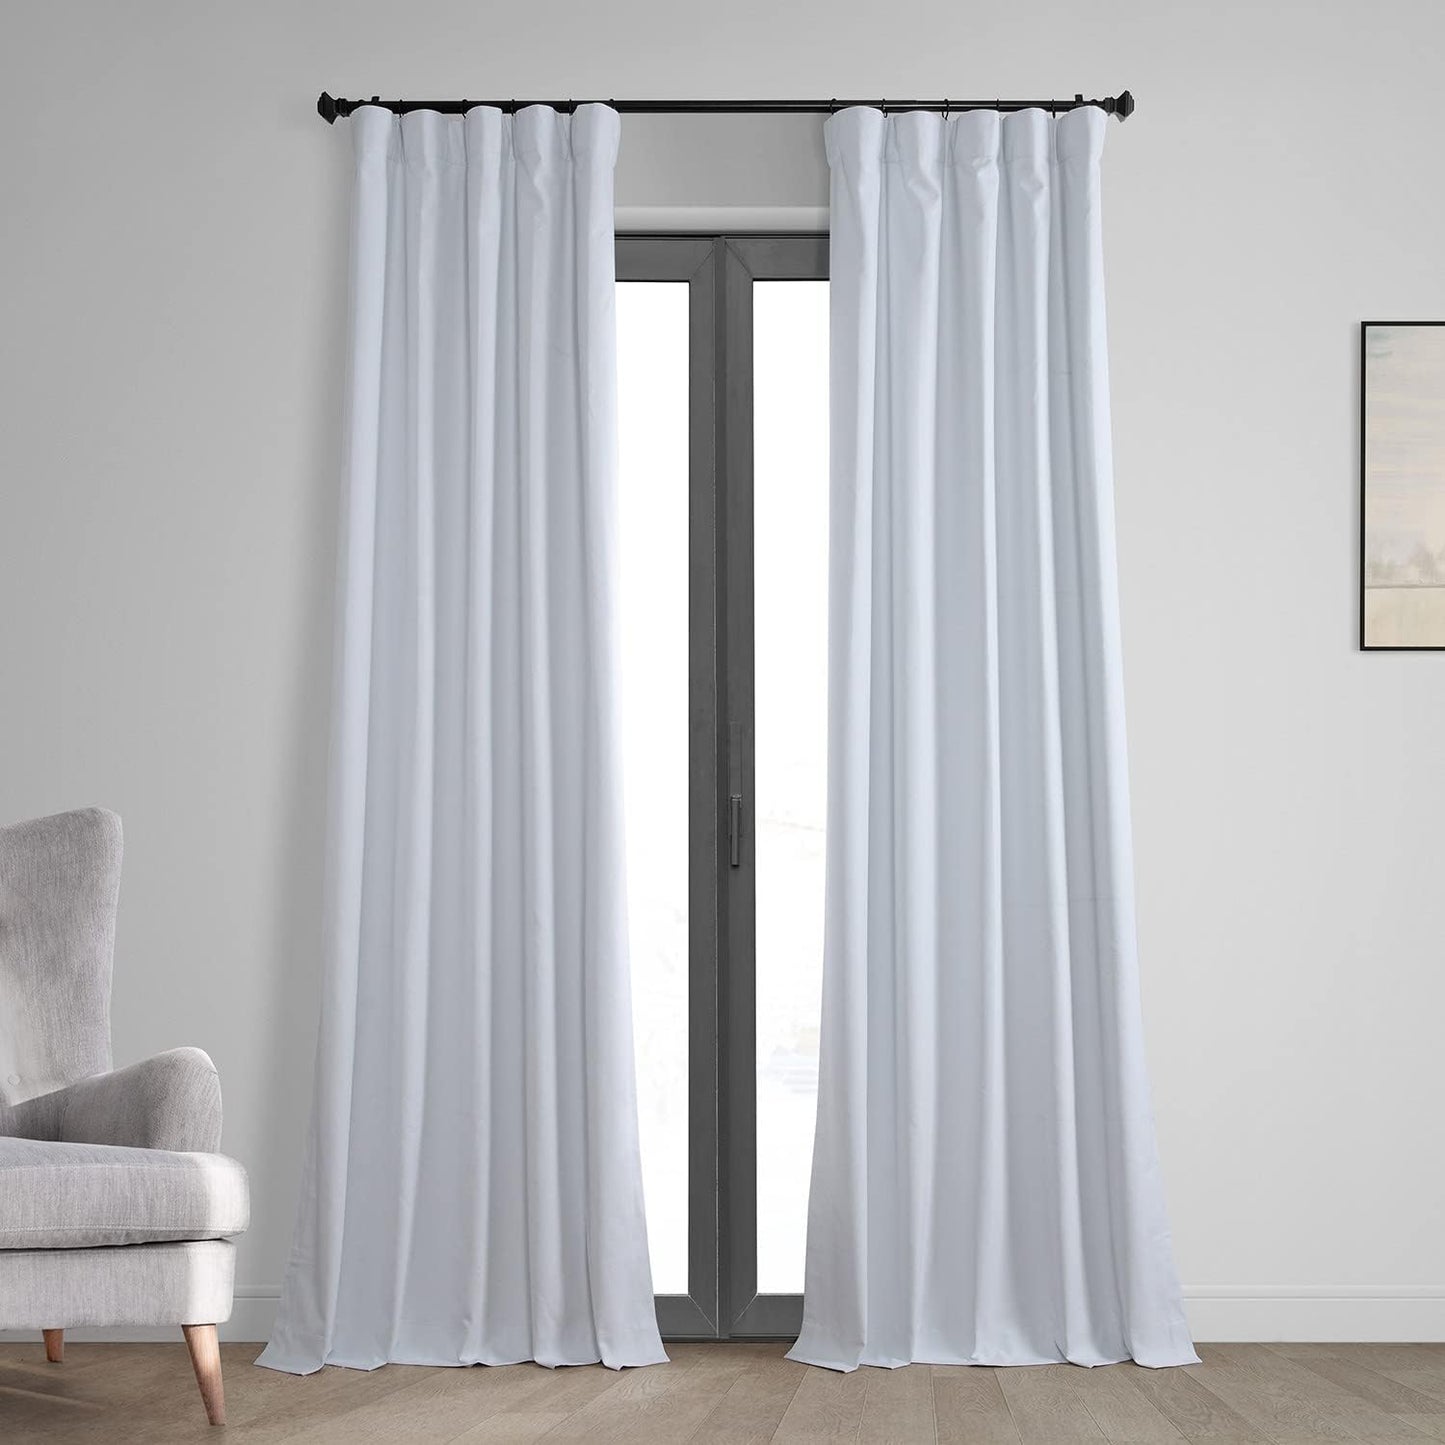 HPD Half Price Drapes Vintage Blackout Curtains for Bedroom - 96 Inches Long Thermal Cross Linen Weave Full Light Blocking 1 Panel Blackout Curtain, (50W X 96L), Millennial Grey  Exclusive Fabrics & Furnishings White 50W X 108L 